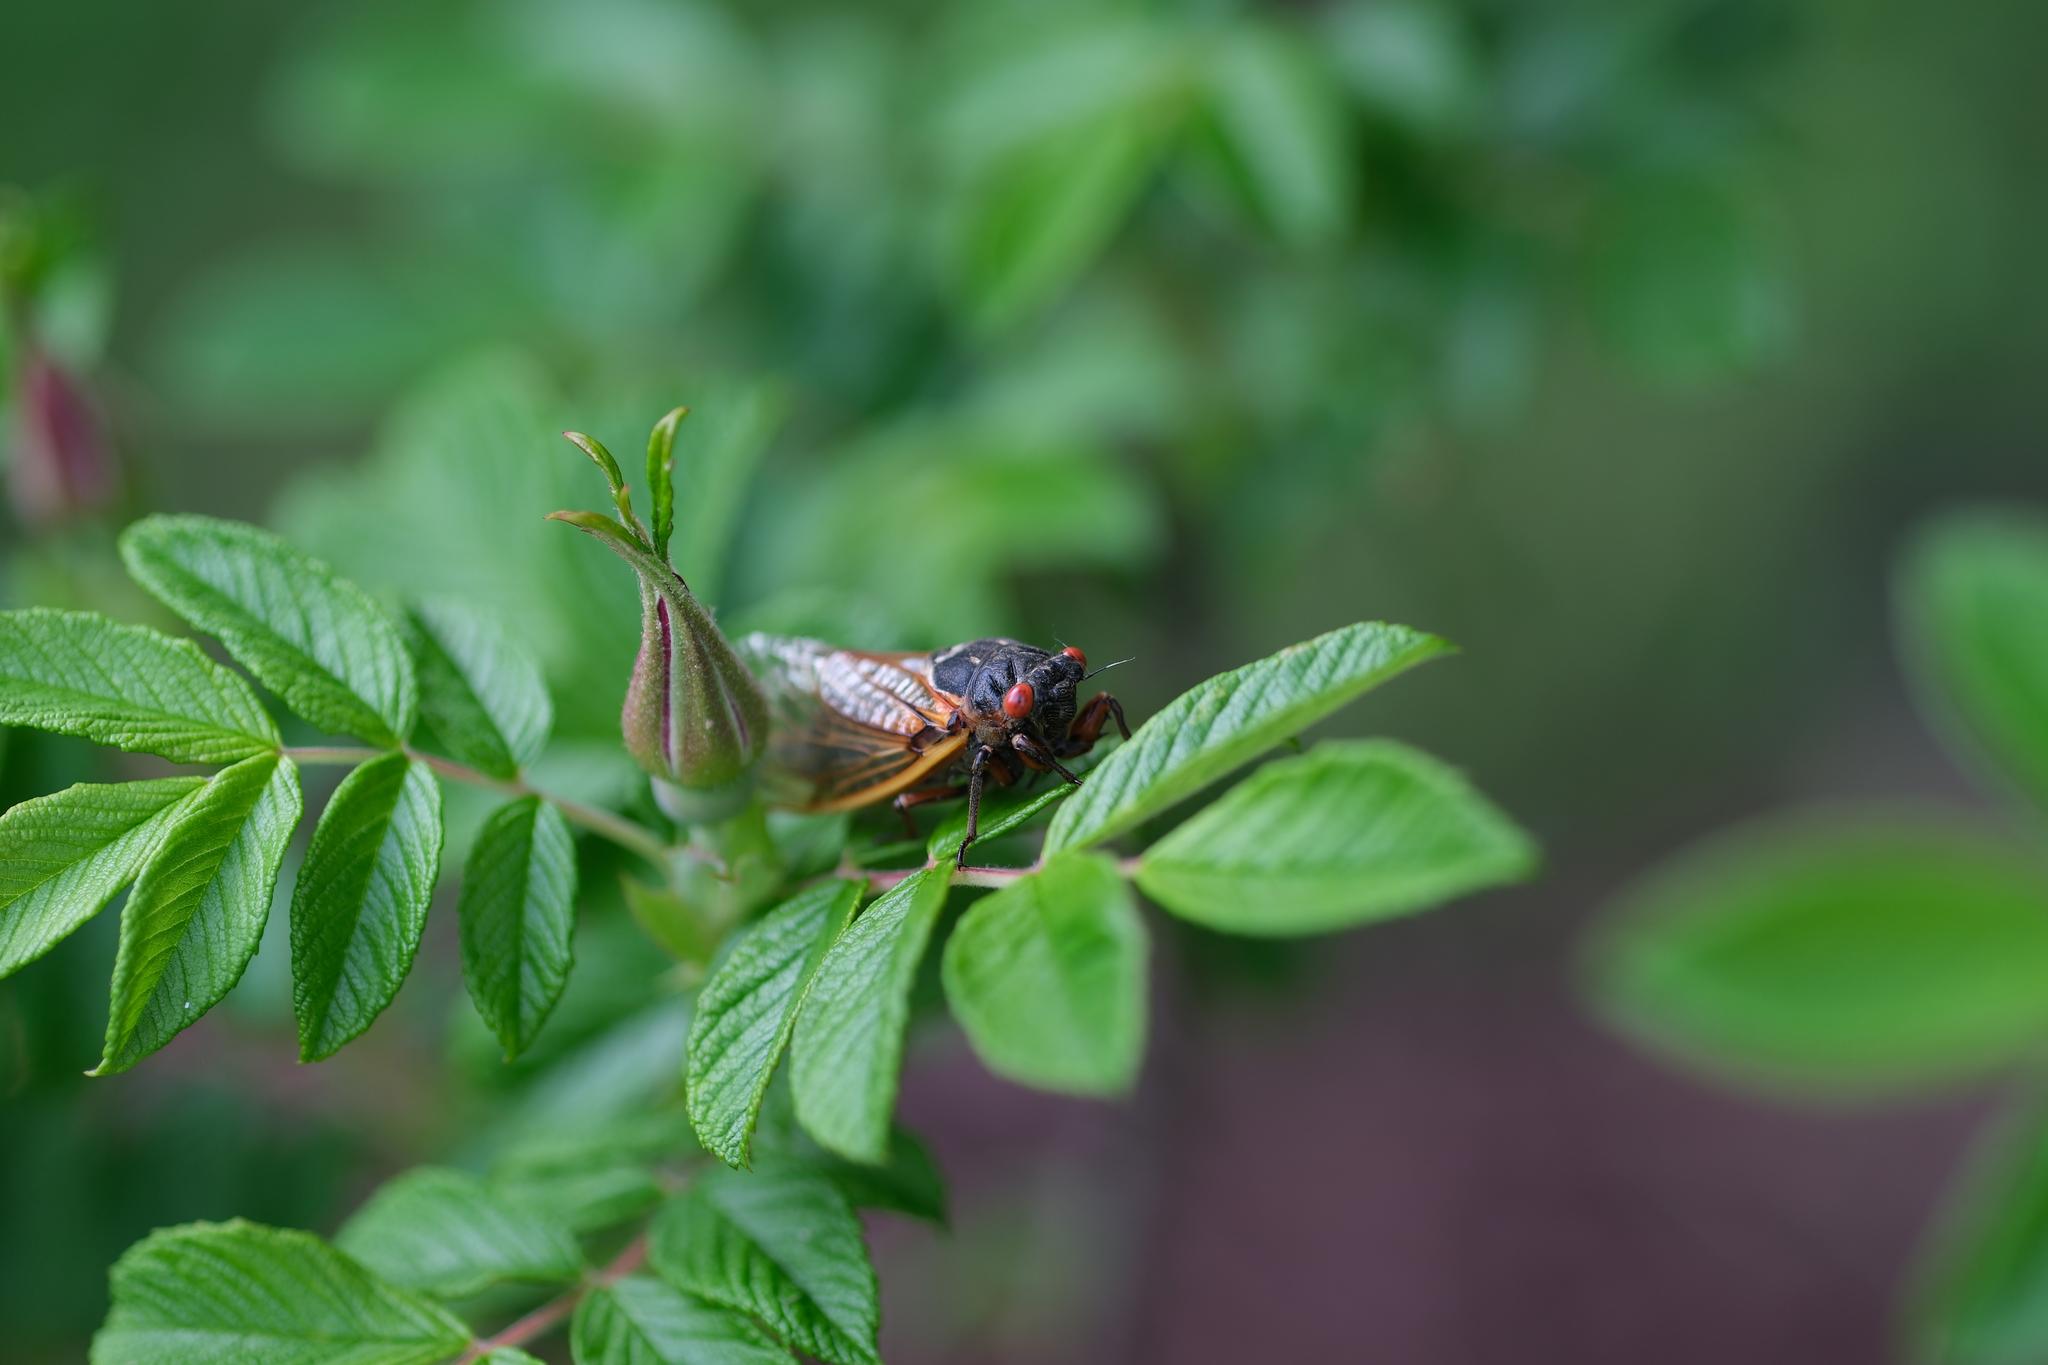 An insect rests on the leaves of a green plant, with a soft-focus background